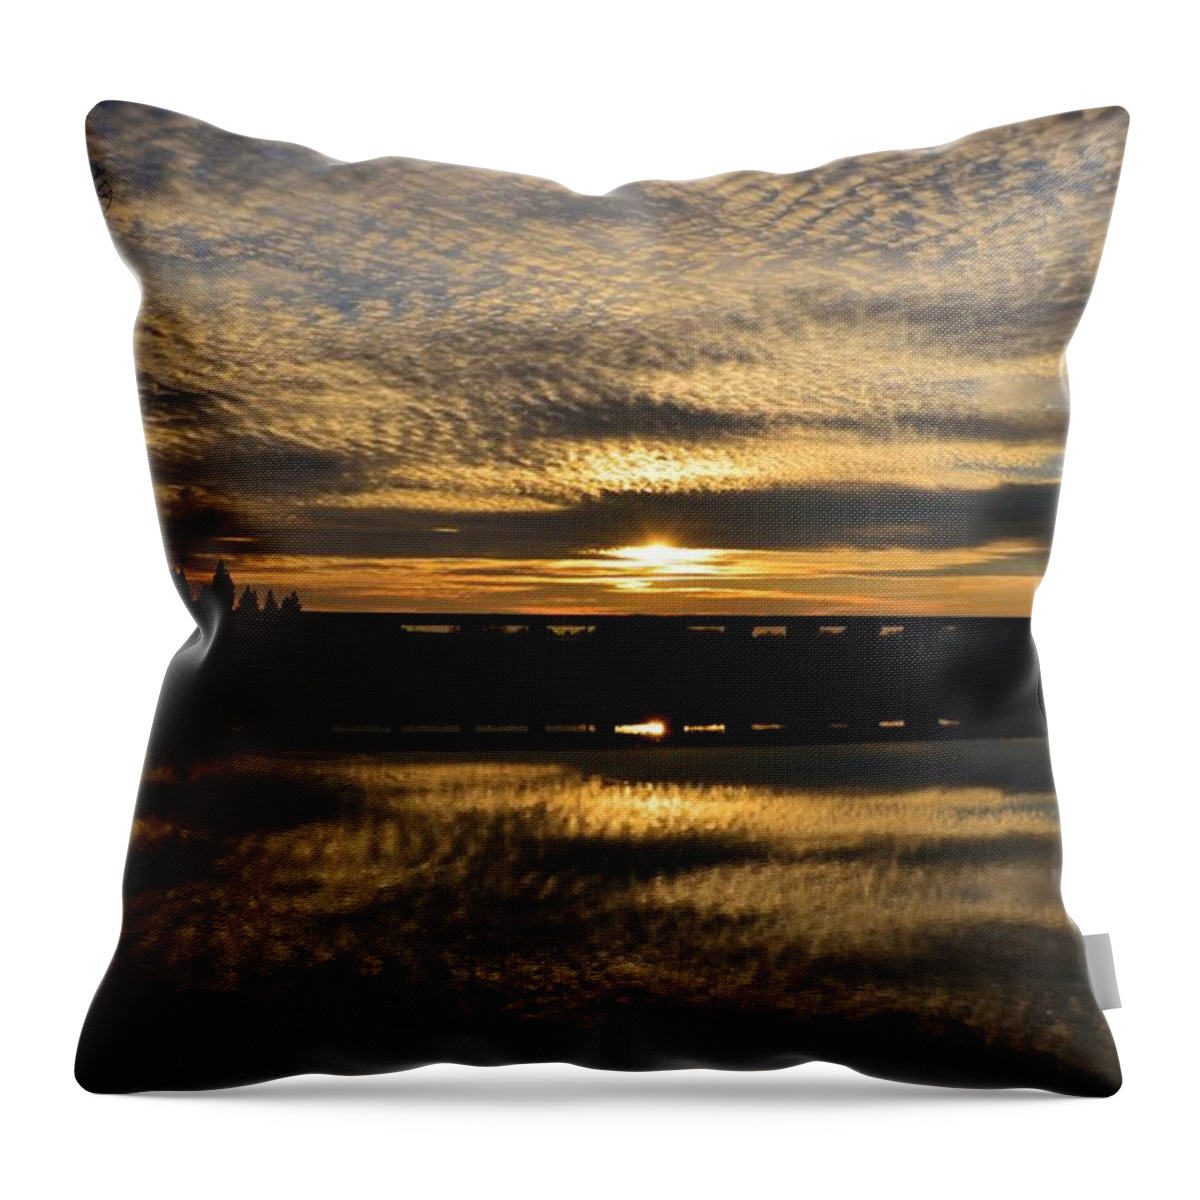 Sunset Throw Pillow featuring the photograph Cotton Ball Clouds Sunset by Marilyn MacCrakin